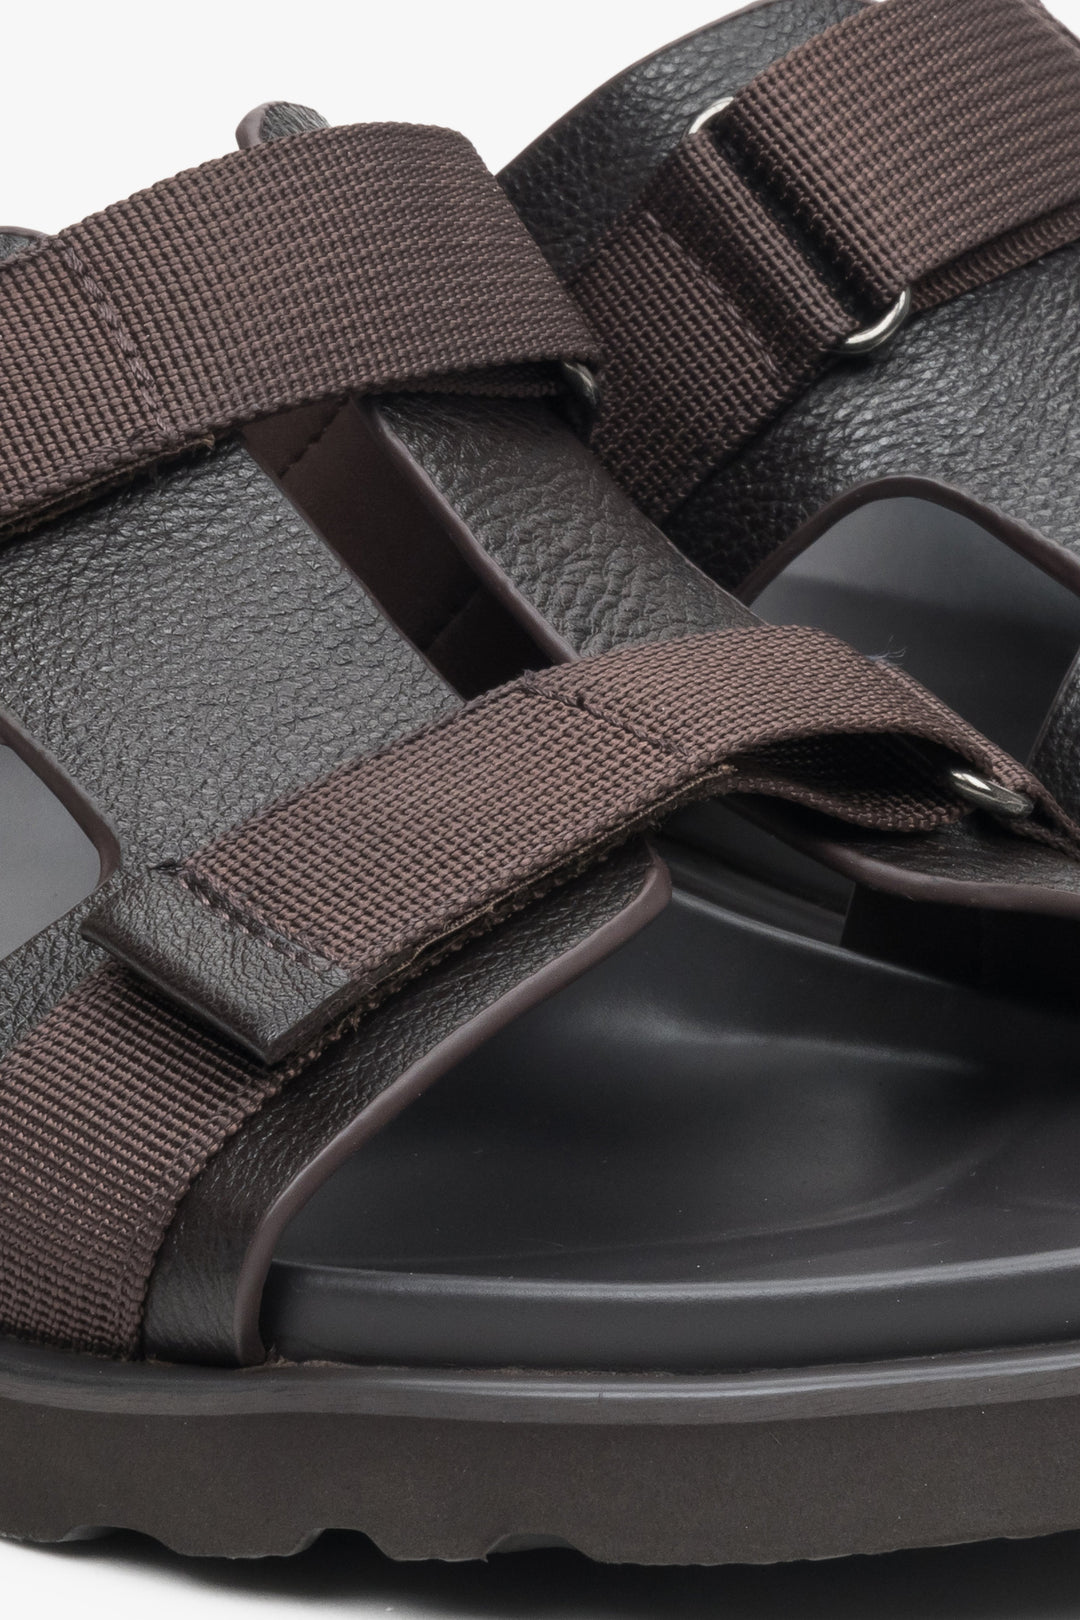 Estro men's dark brown leather sandals - close-up on the fastening system and details.